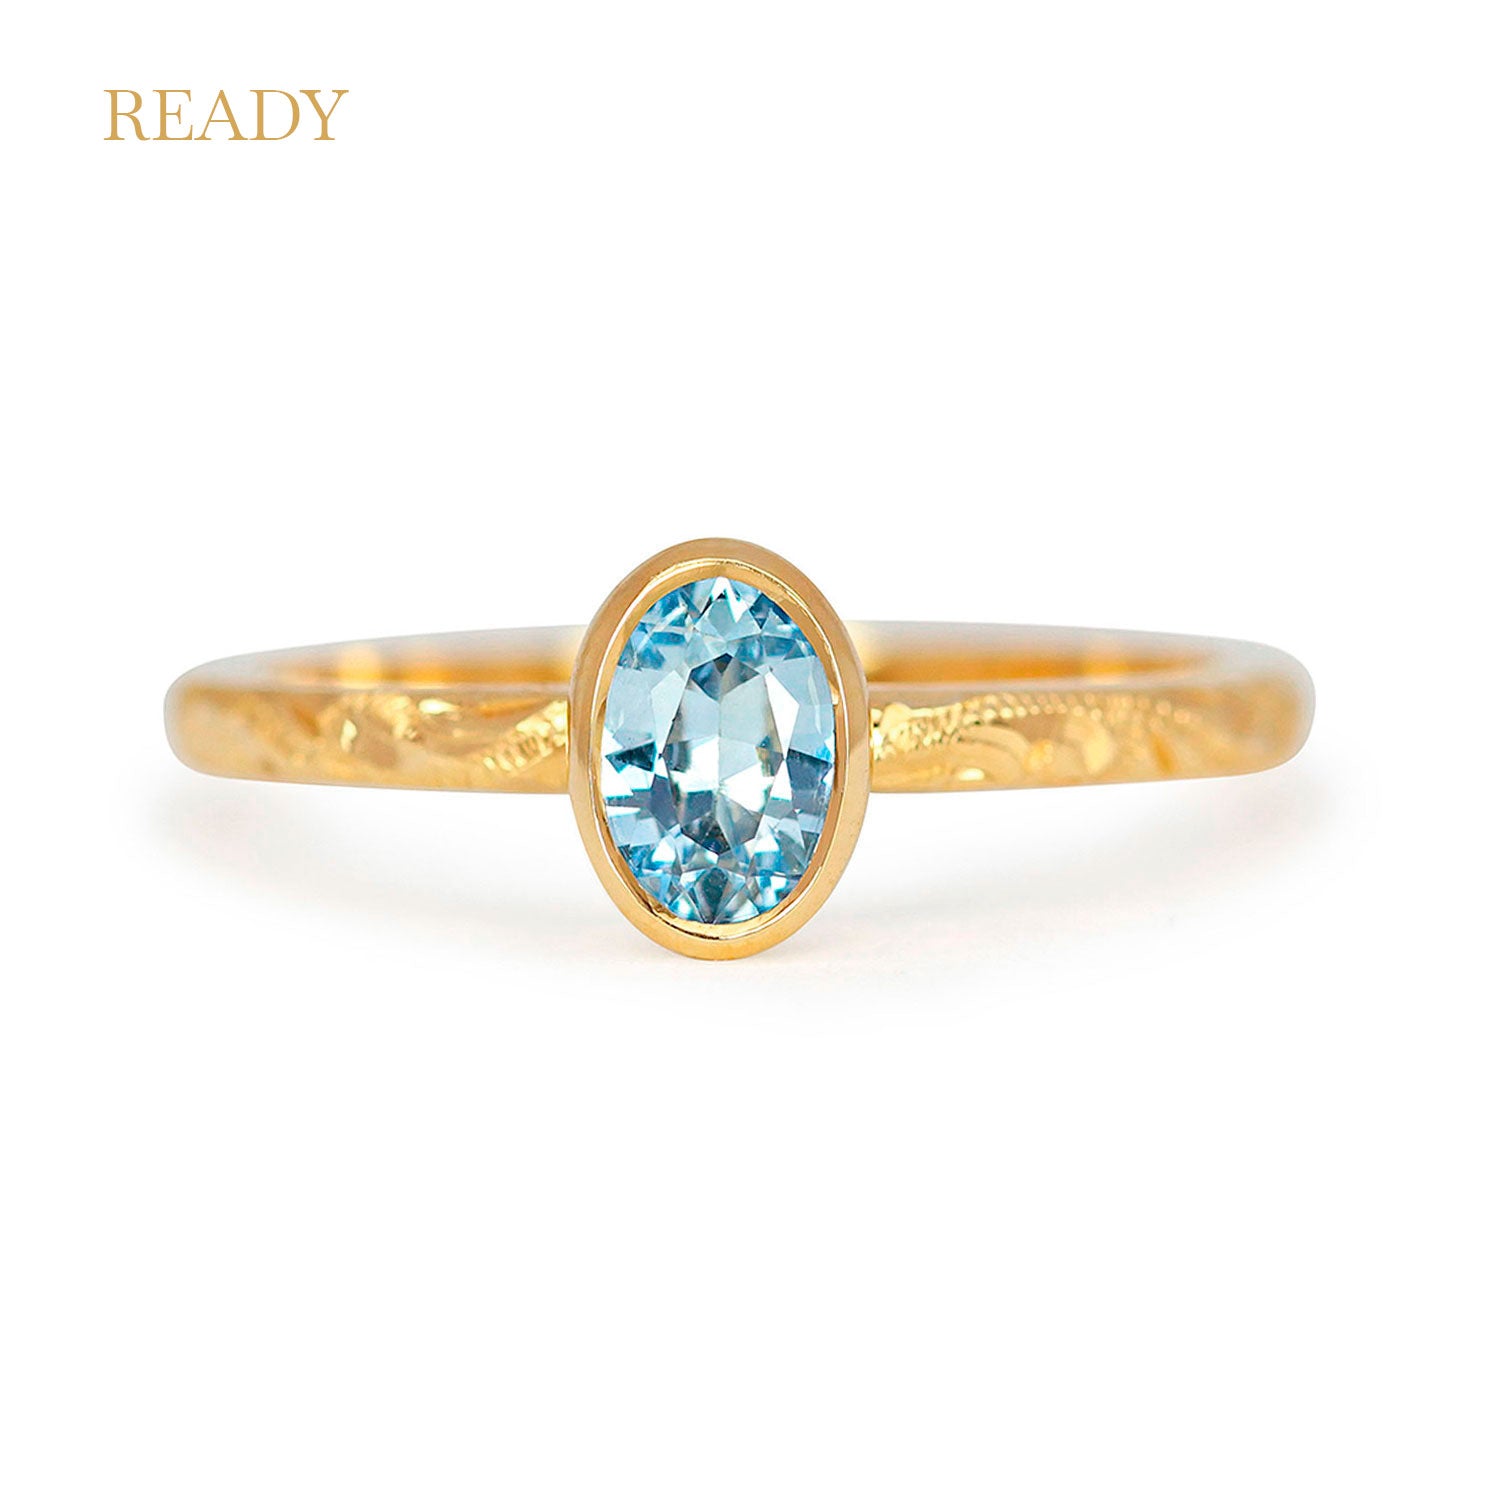 Fancy Hera ethical solitaire engagement ring in 18ct recycled yellow gold, hand-engraved and set with a ice blue oval-cut sapphire of fair-traded and traceable Sri Lankan provenance